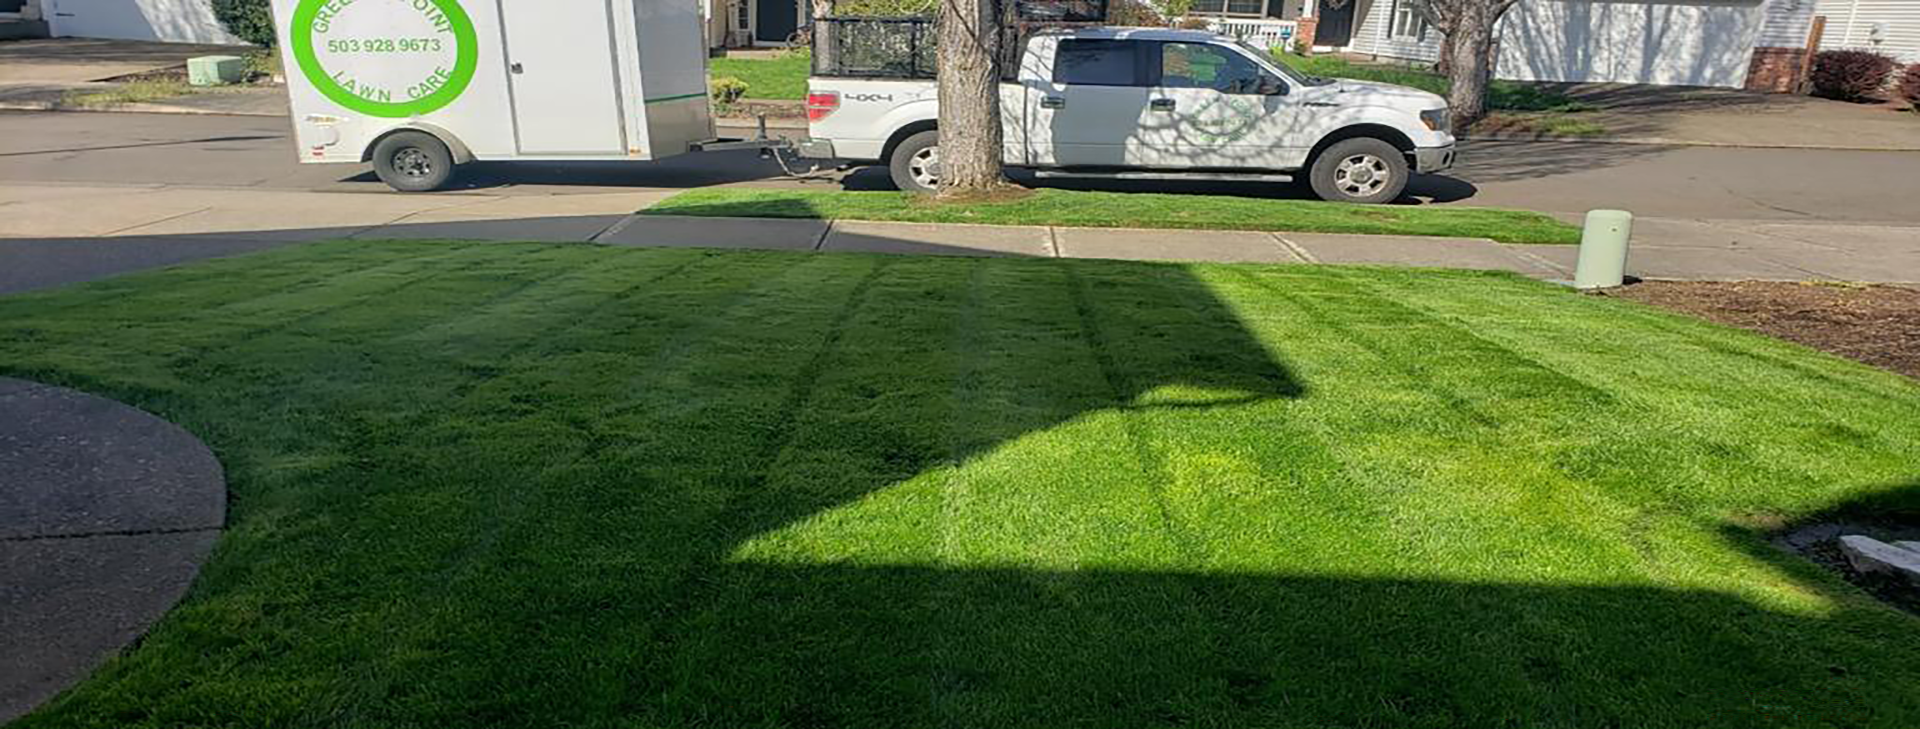 Have a pristine lawn your neighbors are envious of!